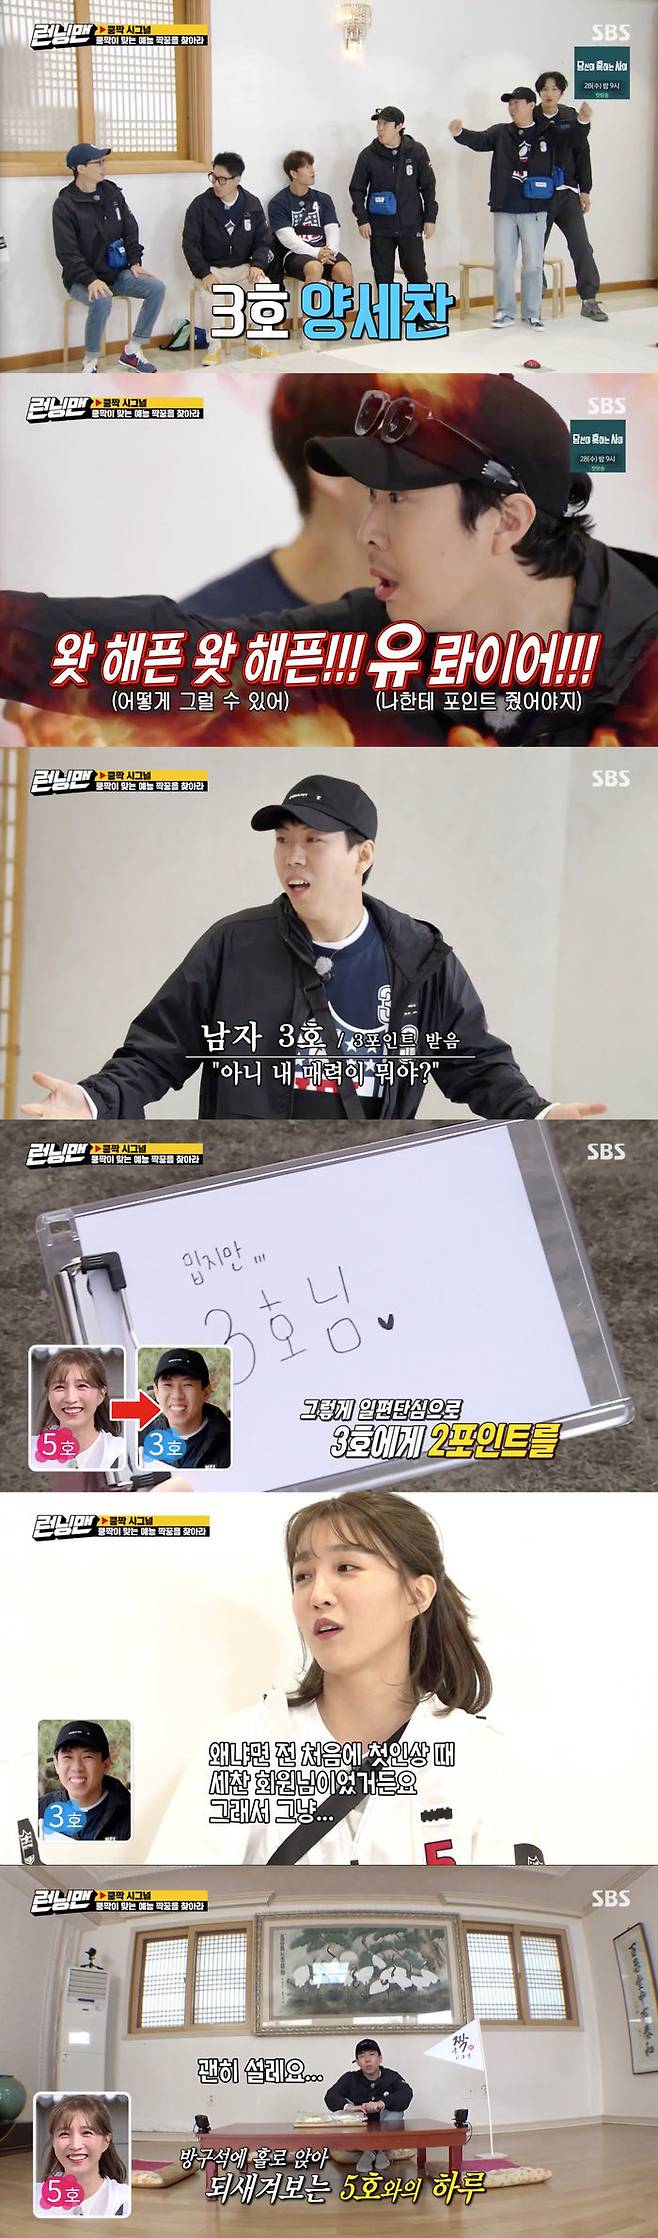 Yang Se-chan received Choices from Lee Cho-hee and Jeong He-In from Middle Choices.On SBS Running Man broadcast on the 25th, the results of the middle Choices were released.The main character, who received three points from female participants, was released on the show. The main character of the three points was the male No. 3.The man 5 Haha was excited to say What Happens What Happens! Yure to the woman 5 Lee Cho-hee.But the man No. 3 Yang Se-chan said, I was a little surprised, I just felt like Choe was trying to play games. No, what is my charm?The score in the mens third was Lee Cho-hee, the womans fifth, and Lee Cho-hee, the womans fourth, said, Is not Choices the entertainment pair?I am a one-sided style, he said, Choices the same No. 3 Yang Se-chan as the first impression.And Jin He-In has Choices the Man No.3 Yang Se-chan who ate lunch together to secure a score.The woman No. 2 Jeon So-min, who learned why Lee Cho-hees Yang Se-chan Choices was a maybe we should really date after today.Its not a joke, warned Lee Cho-hee, and I hate that possibility.I do not want it very much, he said, laughing at the love line.However, Yang Se-chan, who does not know this, said, I do not know why Cho Hee did it.I chose me at first, he said. Hahas brother is making a strange sound and I want to have a heart. I am so excited.